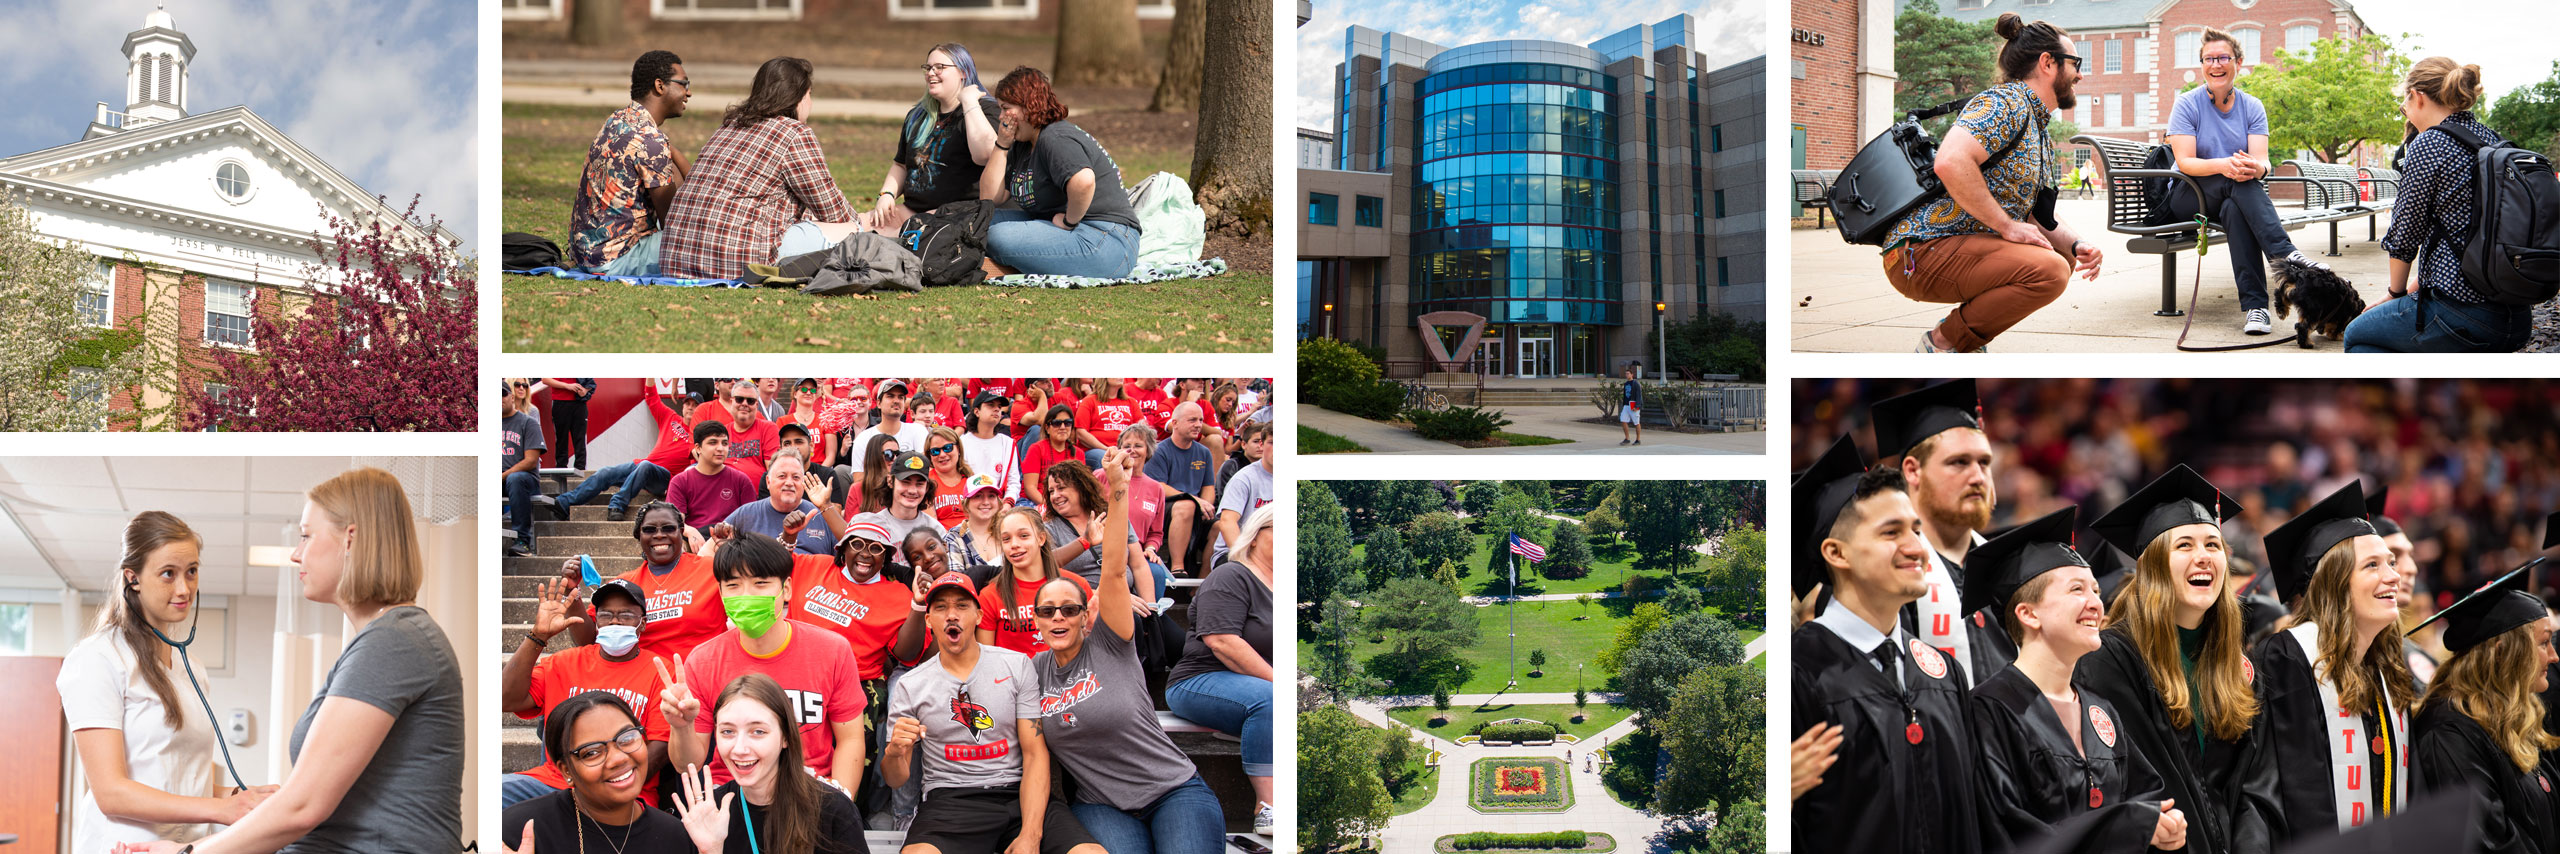 Collage of Illinois State campus and students images